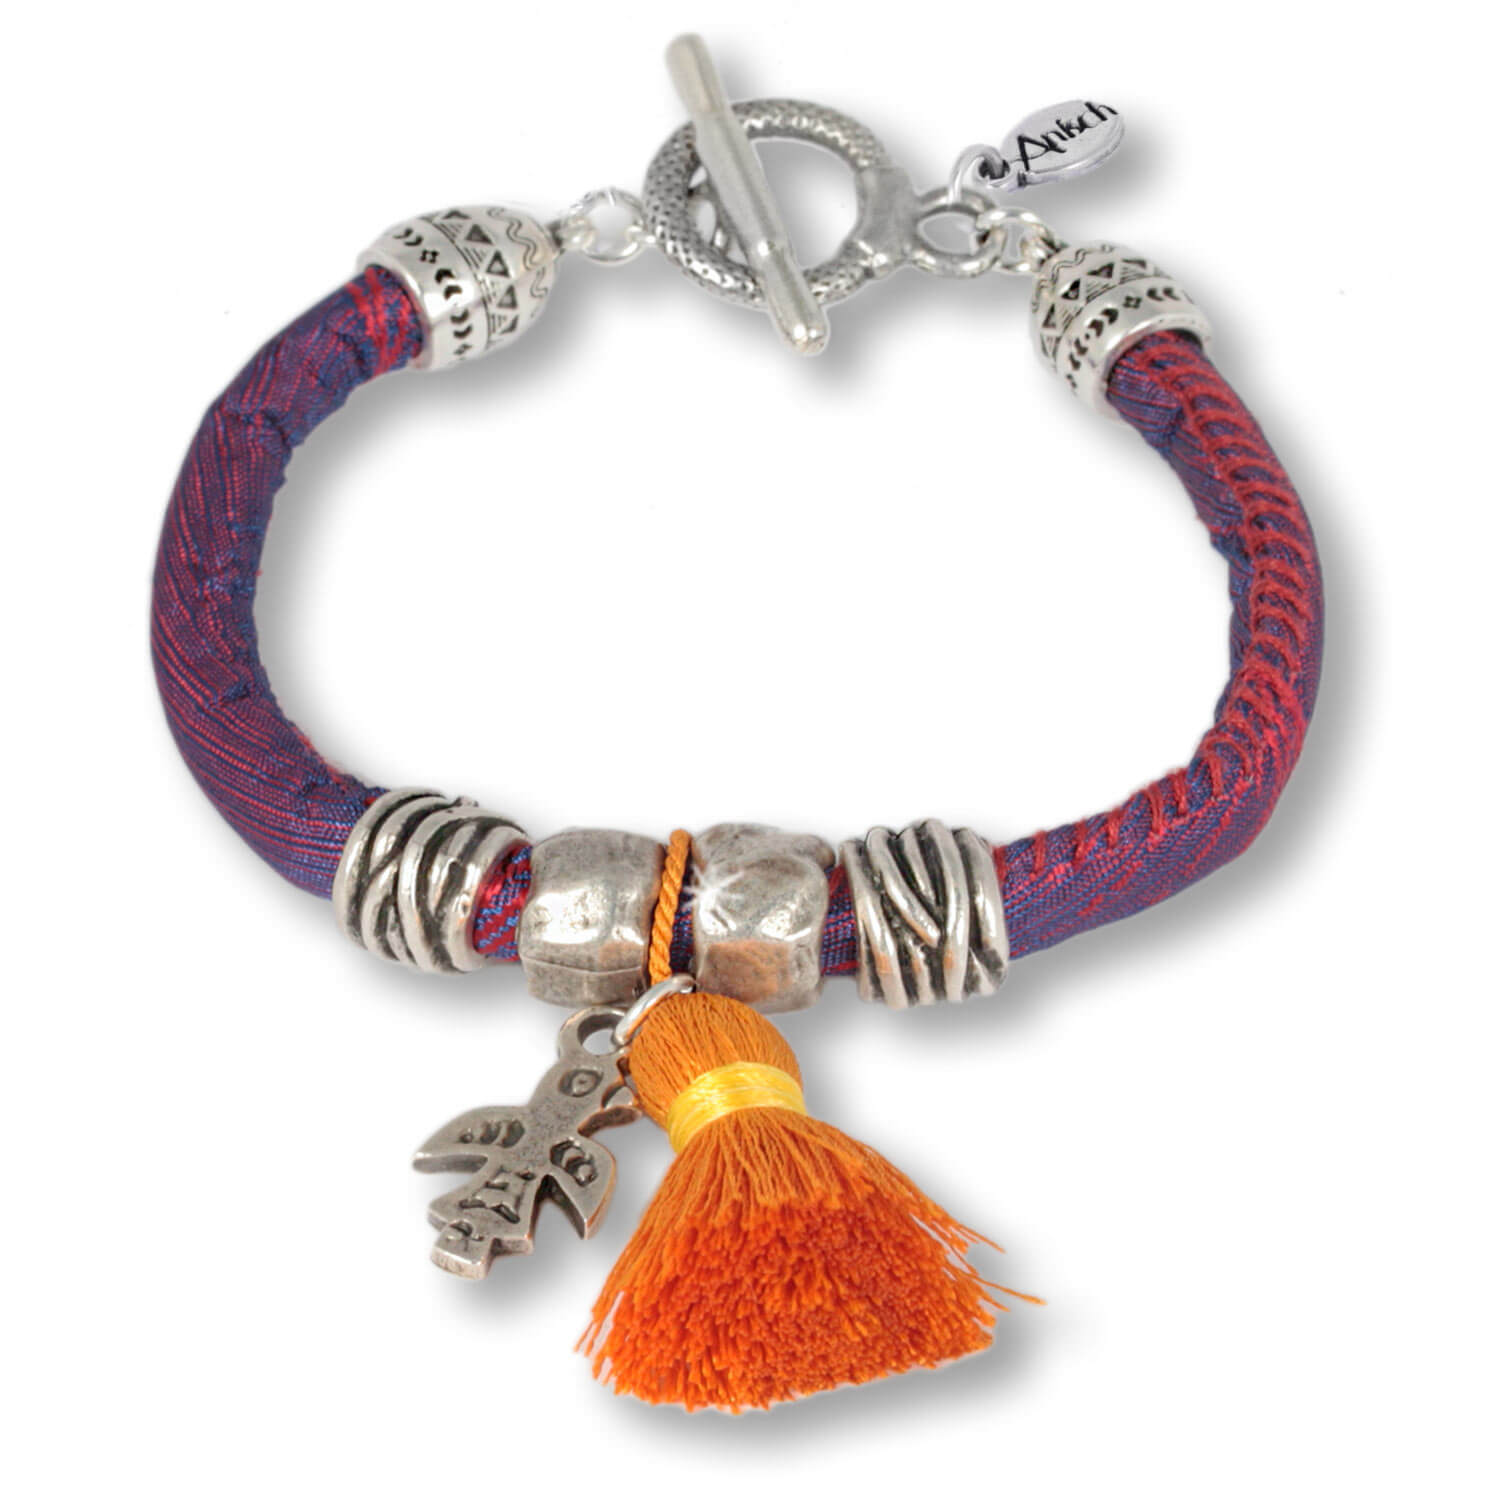 Purple Eagle- Ethno bracelet with traditional patterns